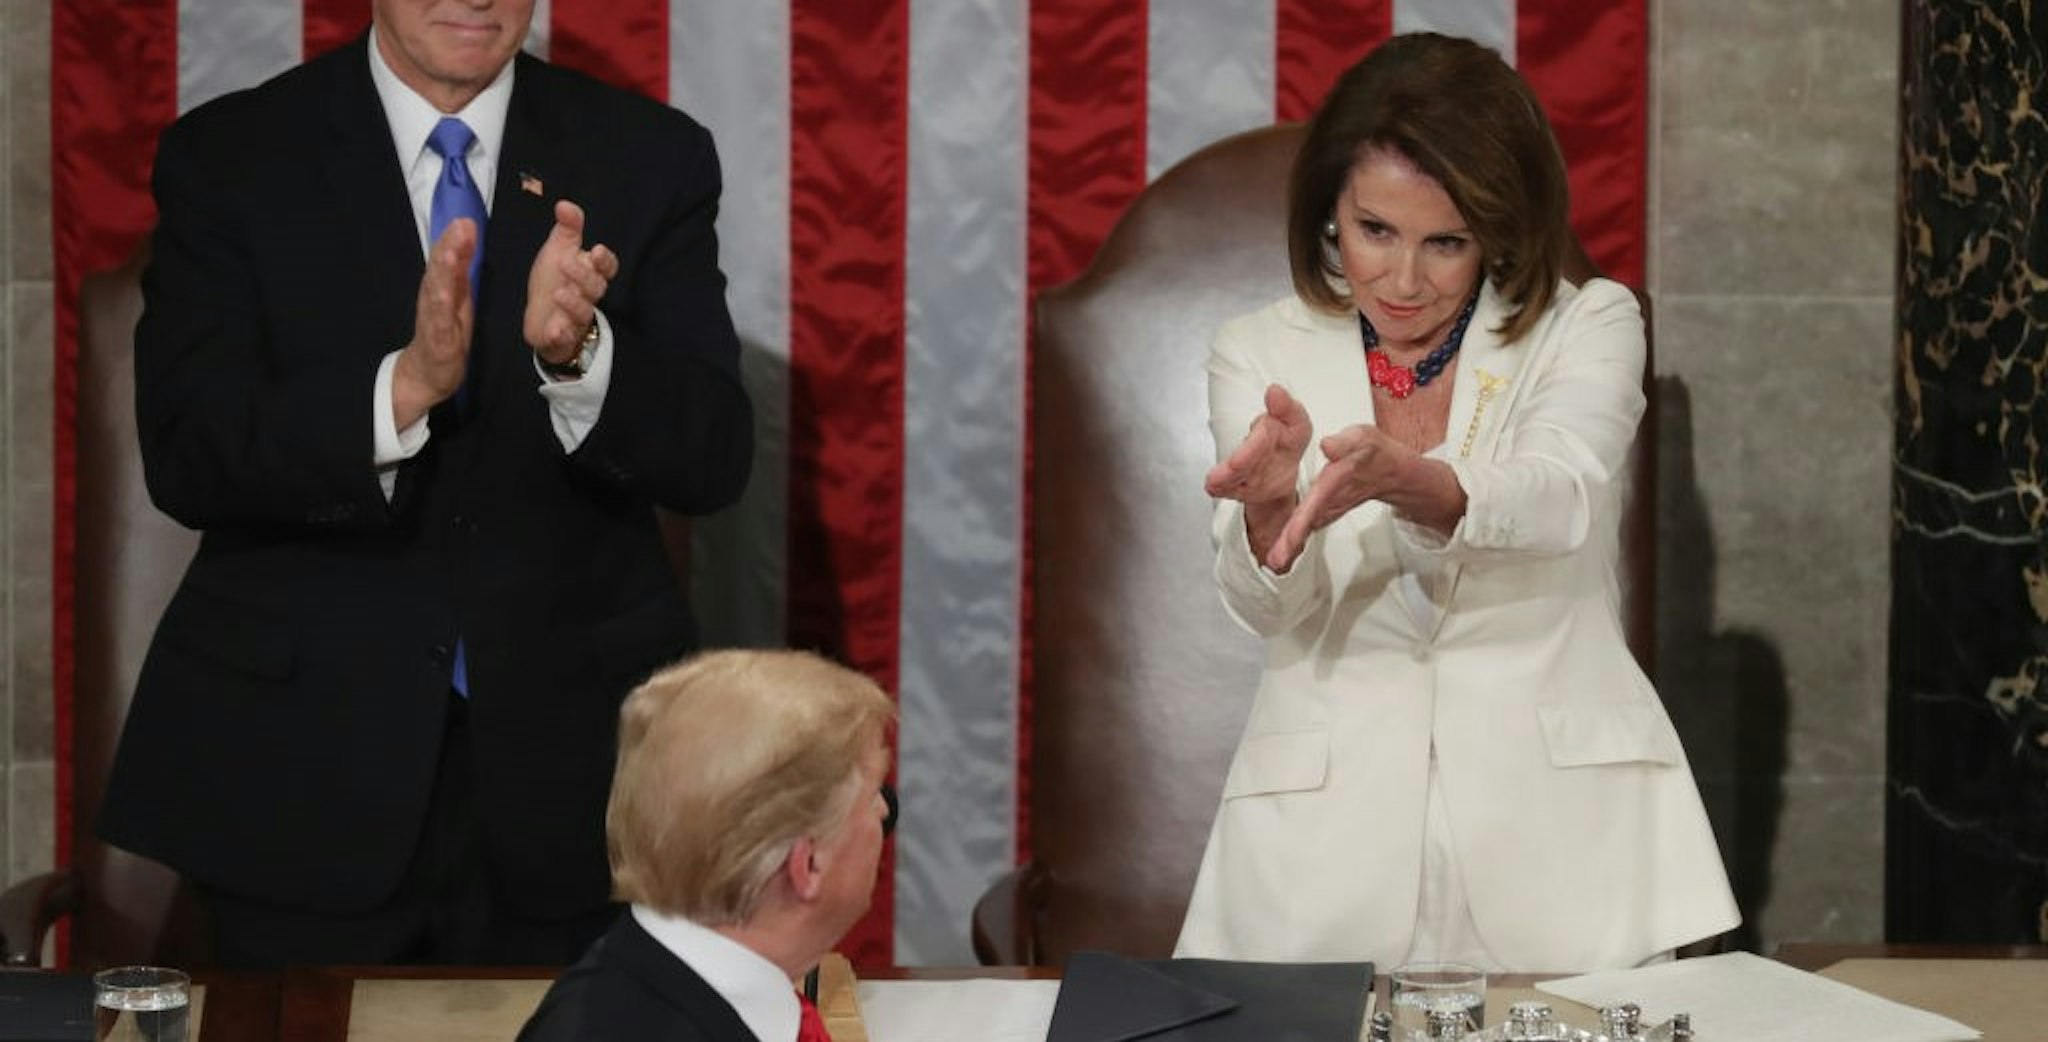 Vice President Mike Pence and Speaker Nancy Pelosi greet President Donald Trump just ahead of the State of the Union address in the chamber of the U.S. House of Representatives at the U.S. Capitol Building on February 5, 2019 in Washington, DC. President Trump's second State of the Union address was postponed one week due to the partial government shutdown.